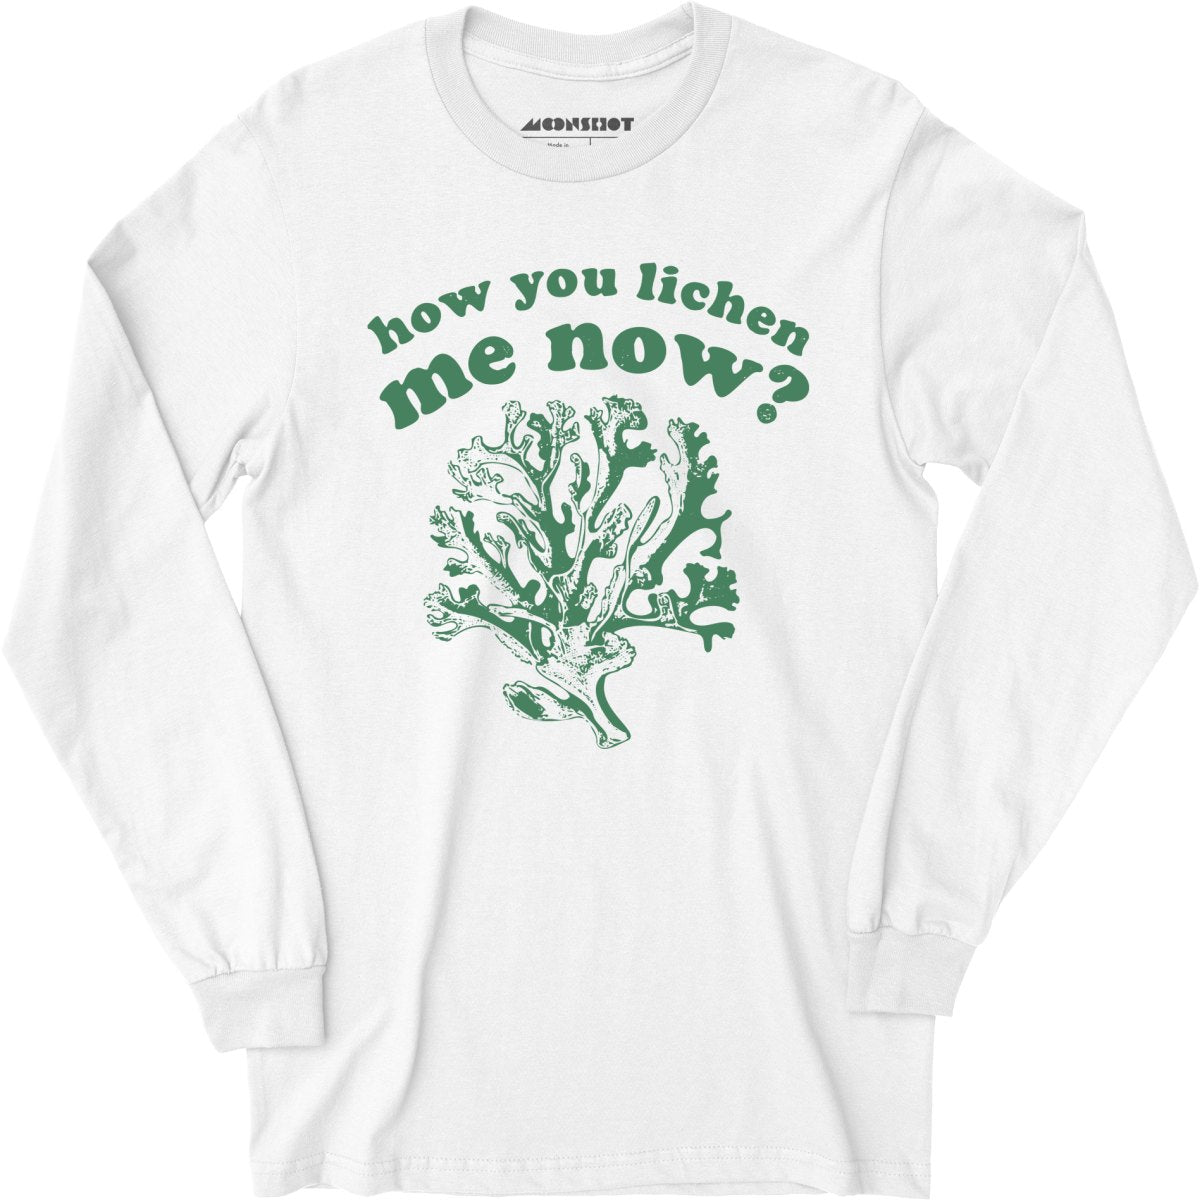 How You Lichen Me Now? - Long Sleeve T-Shirt